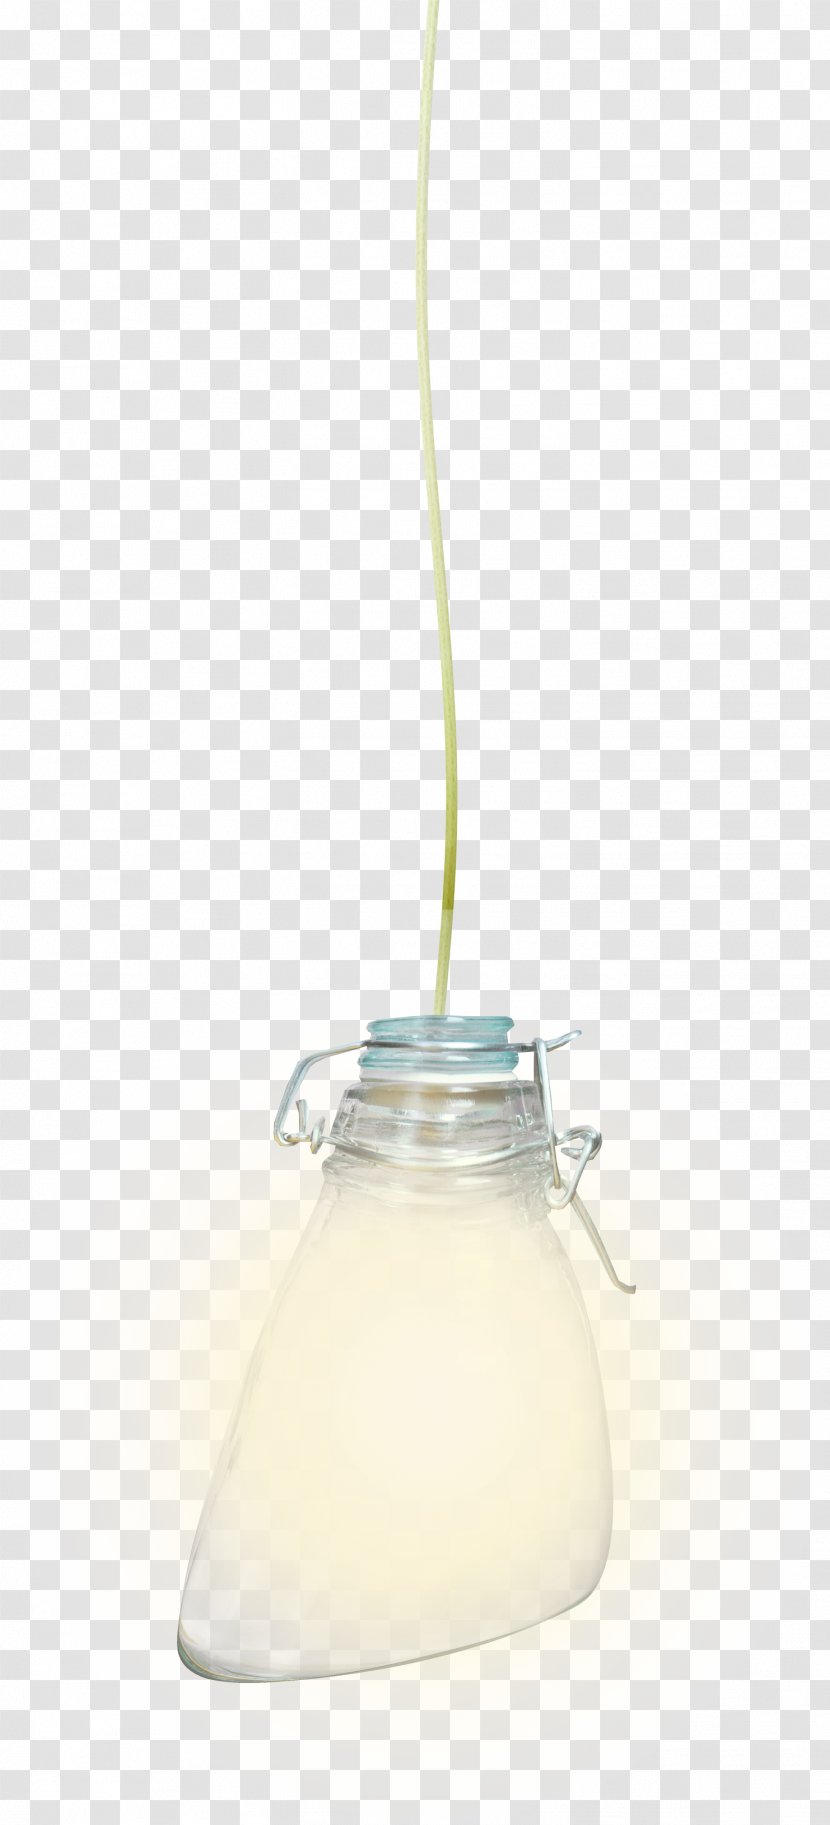 Table-glass Yellow - Tableglass - White Bottle Transparent PNG